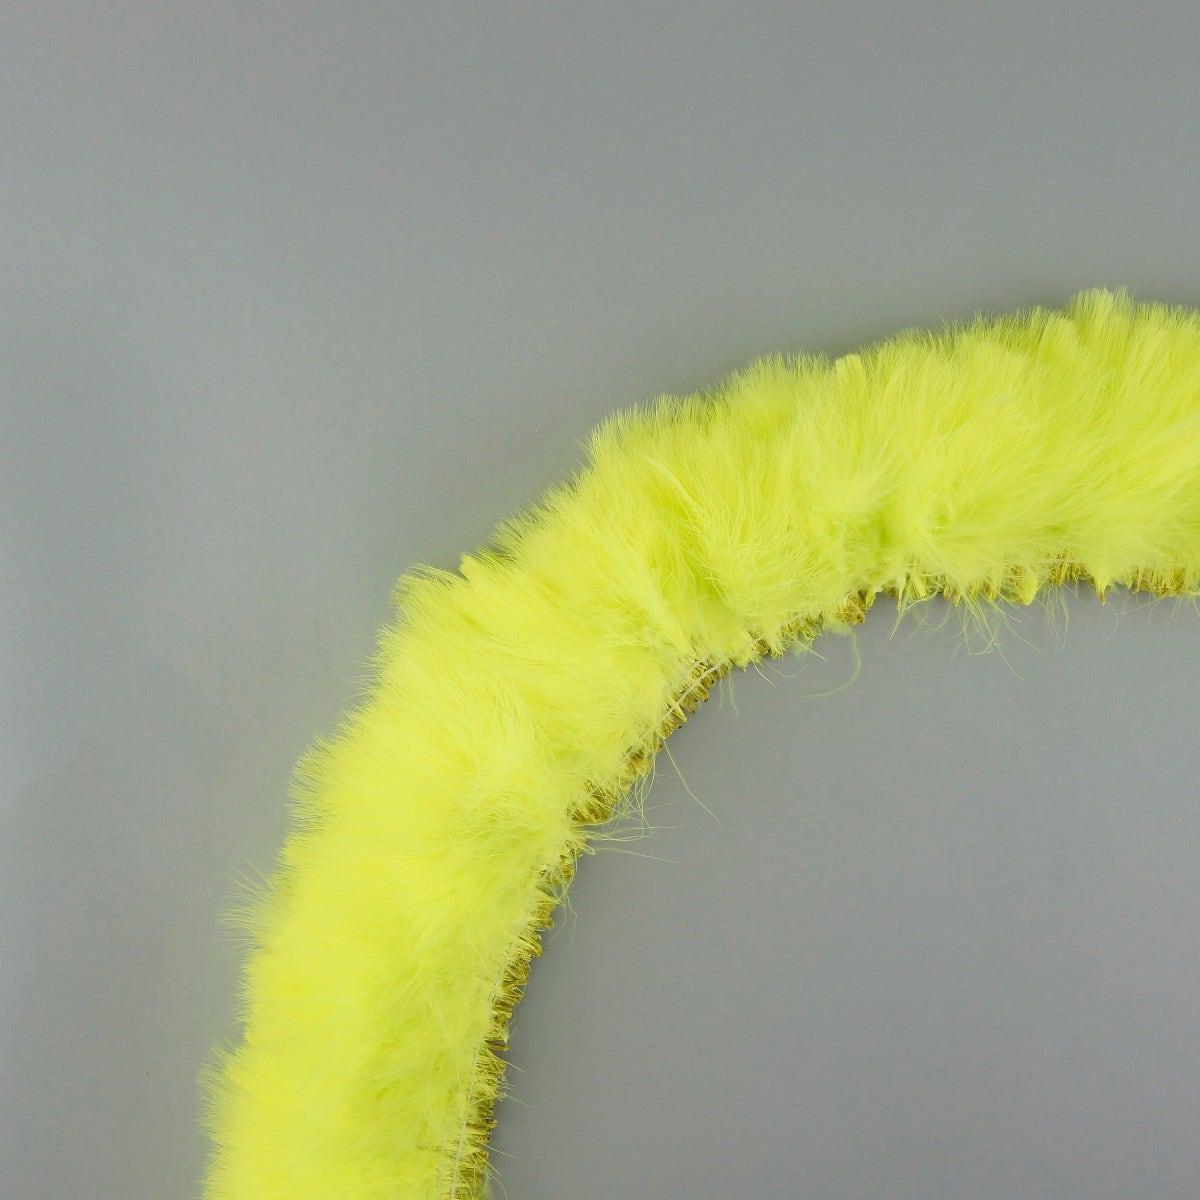 STRUNG TURKEY MARABOU BLOOD QUILL FEATHERS - 3-4"  FLUORESCENT CHARTREUSE